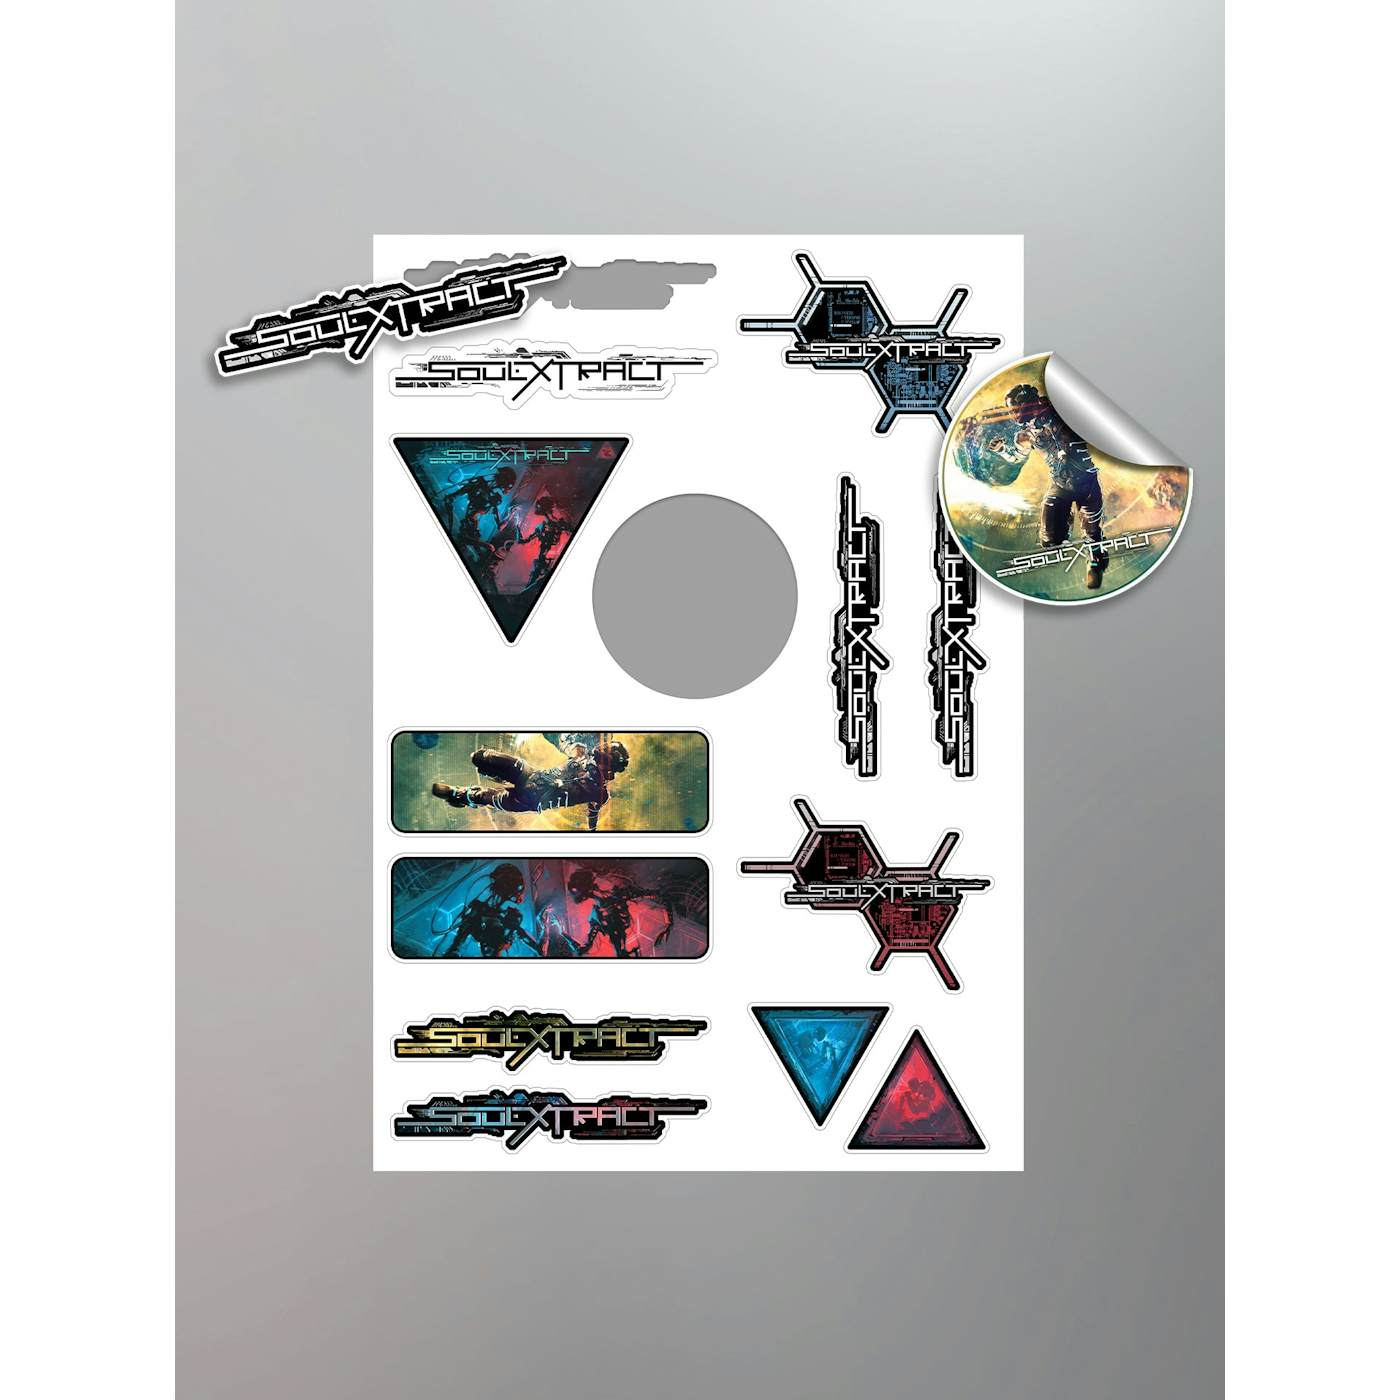  Soul Extract - Solid State Sticker Sheet